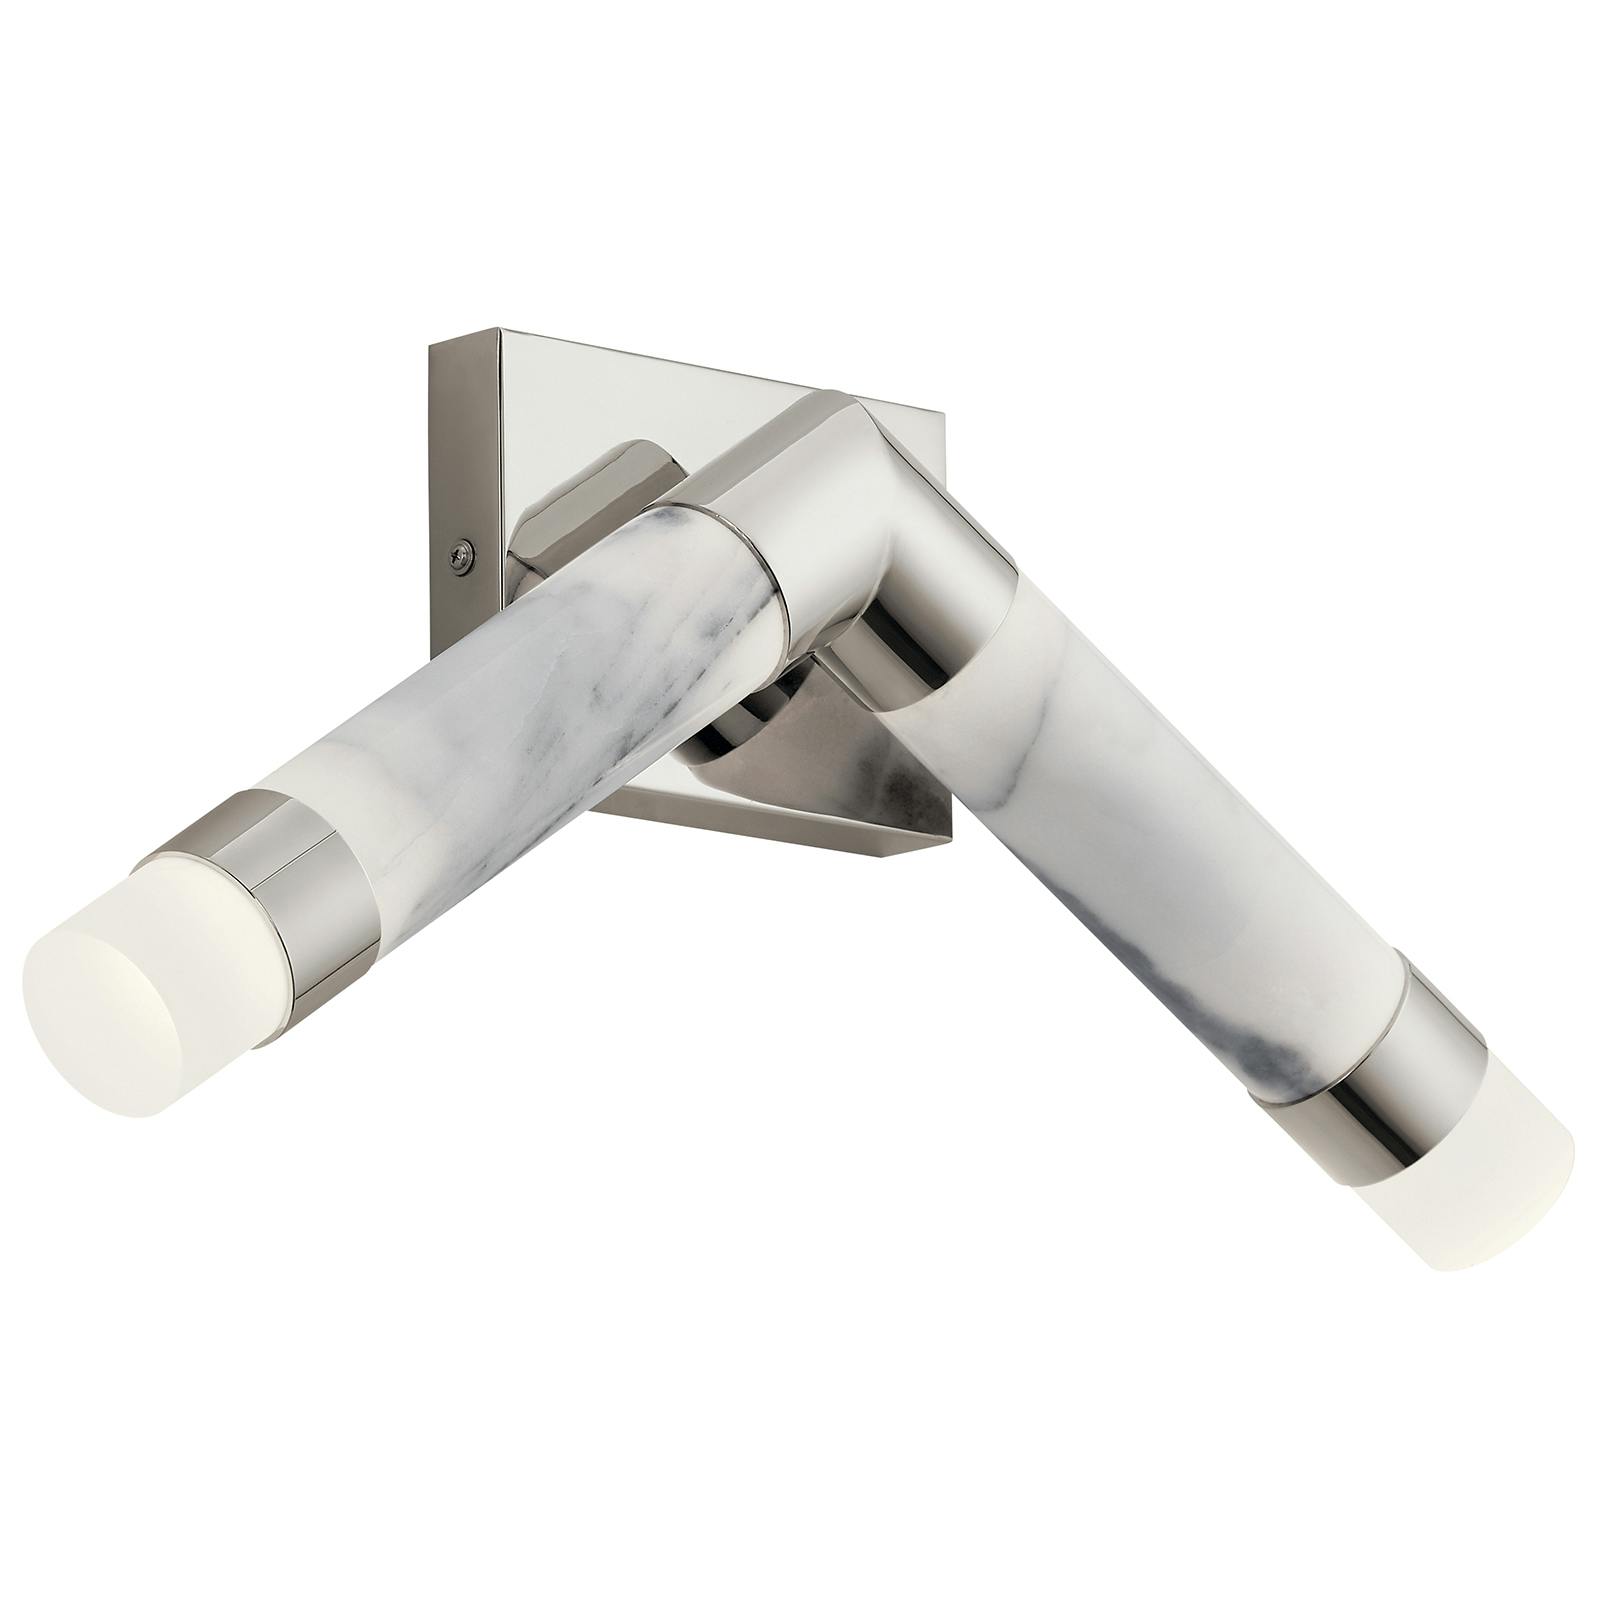 Avedu Wall Sconce Polished Nickel on a white background